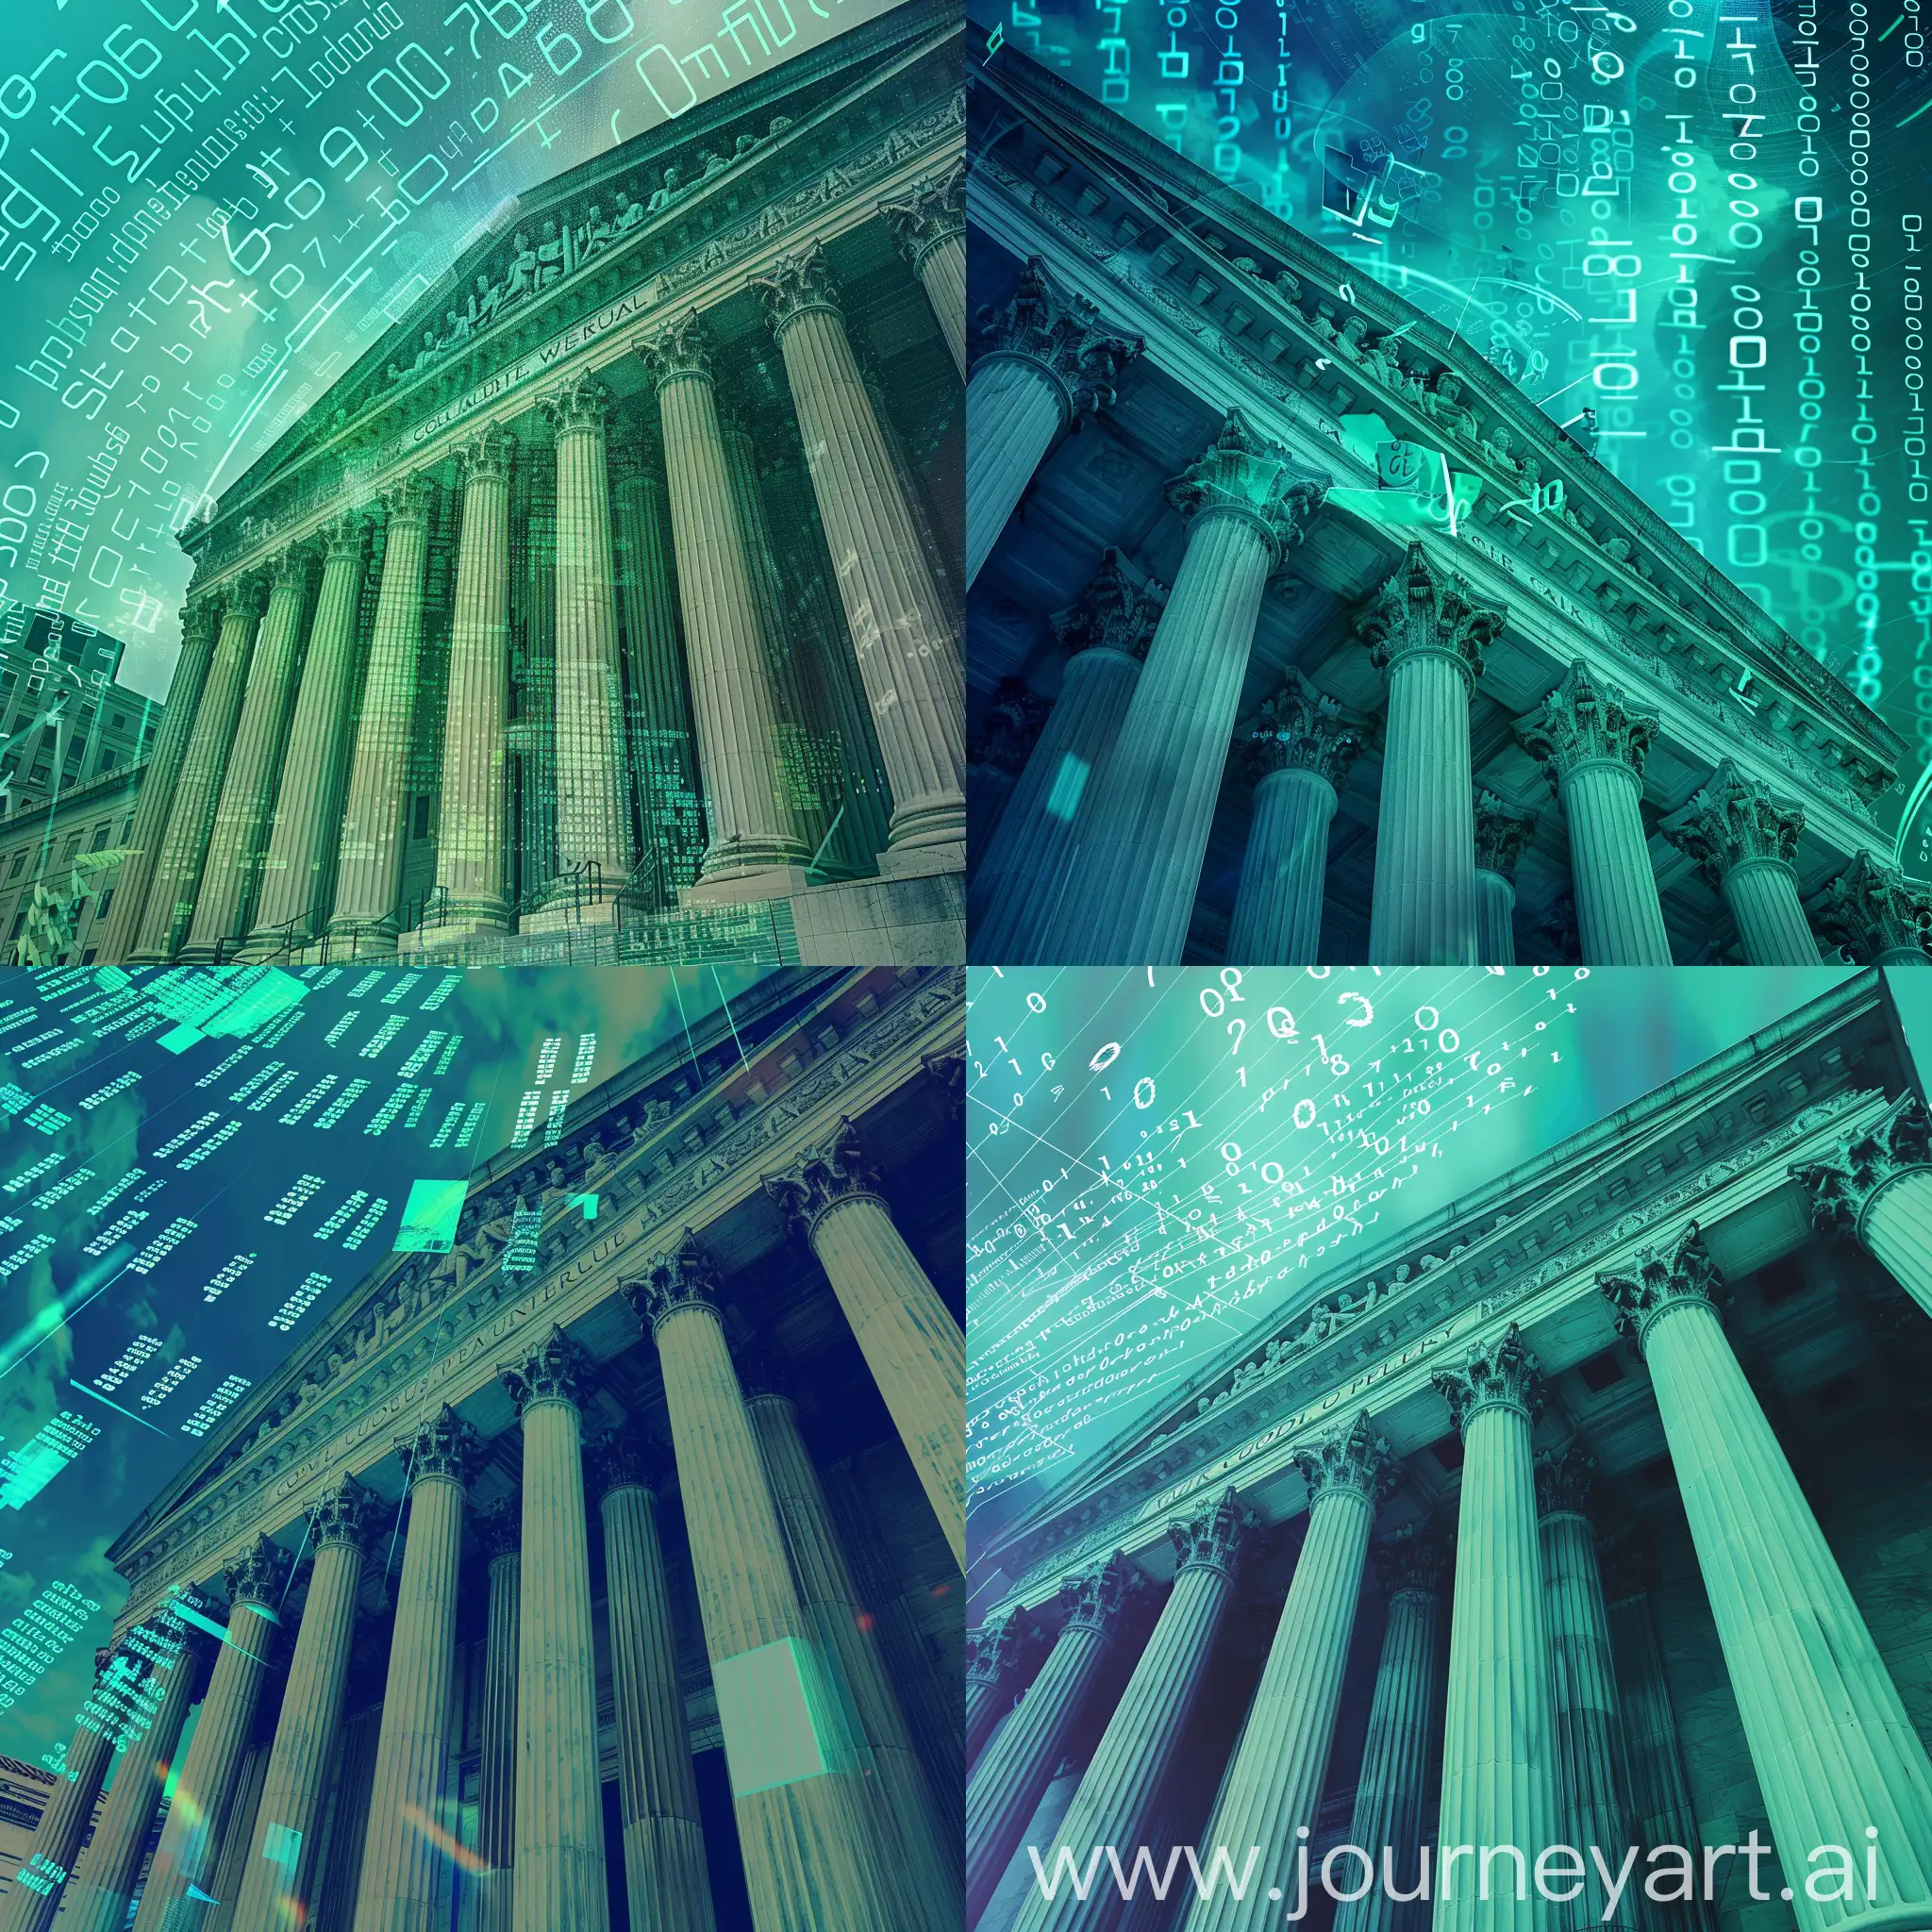 Digital-Courthouse-with-Ethereal-Digits-in-Blue-and-Green